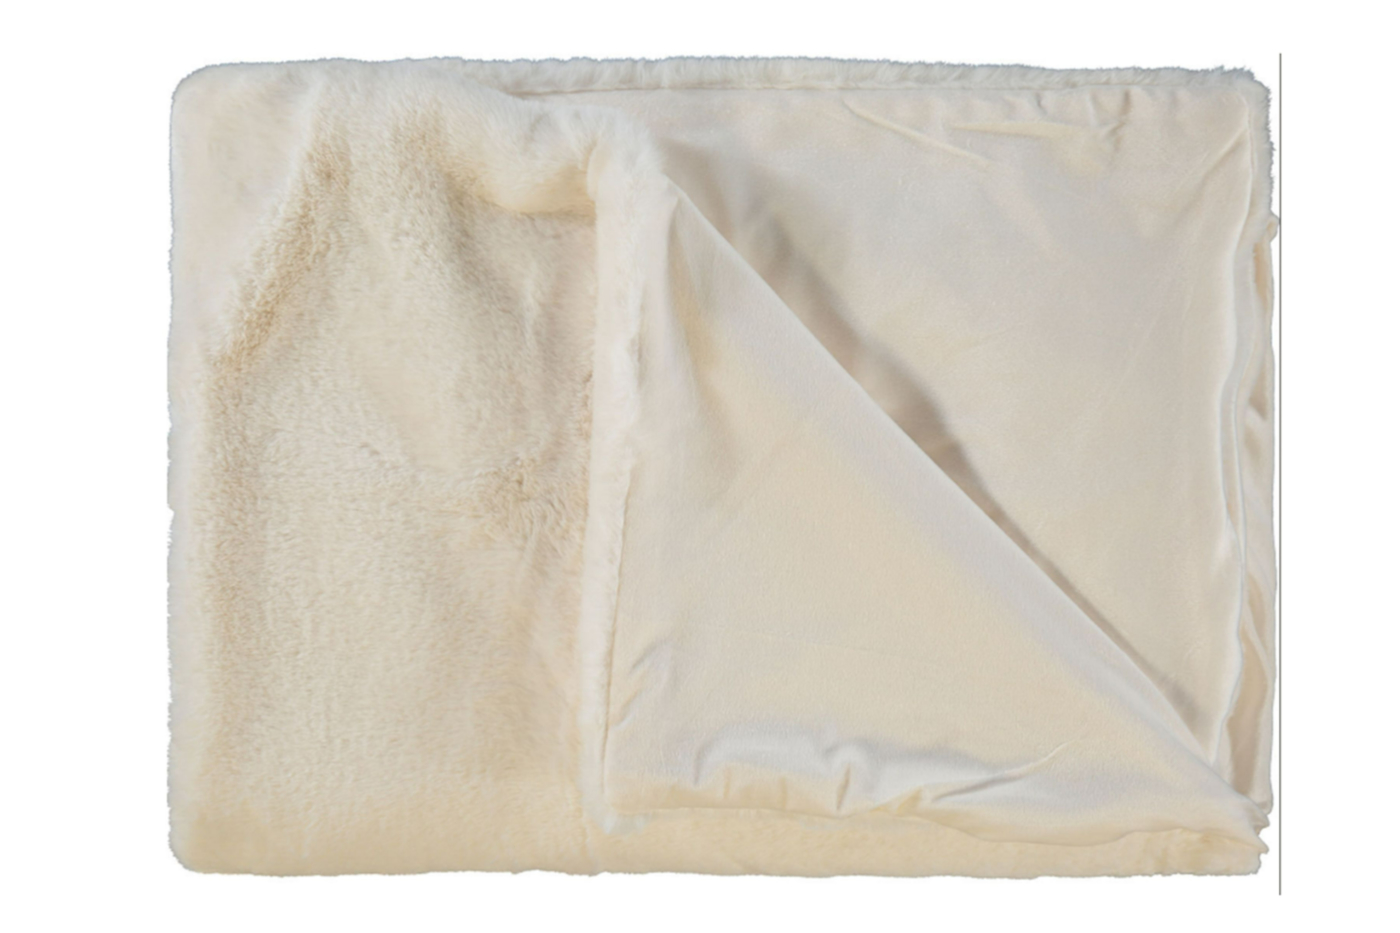 View Cream Soft Touch Cosy Rolled Flannel Fleece Throw 1800 x 1400mm Ideal For Beds Or Sofas Stitched Piped Edging Adds Texture And Warmth information